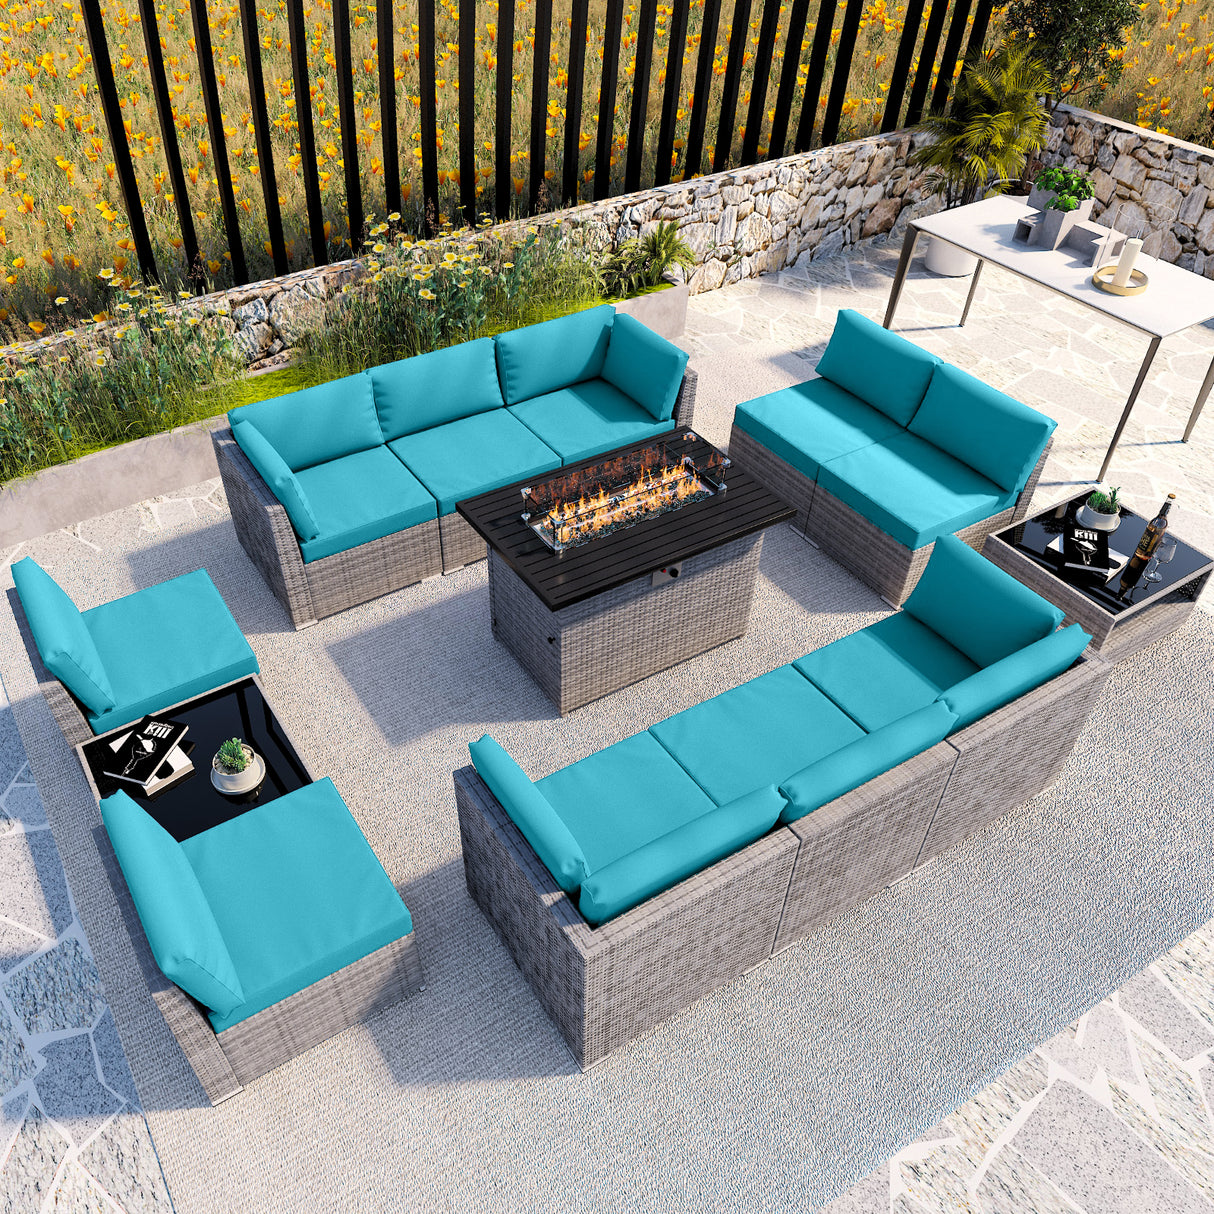 EAGLE PEAK 13 Piece Outdoor Wicker Patio Furniture Set with Fire Table and 2 Coffee Tables, PE Rattan Sectional Conversation Sofa Set with Seating for 10 People